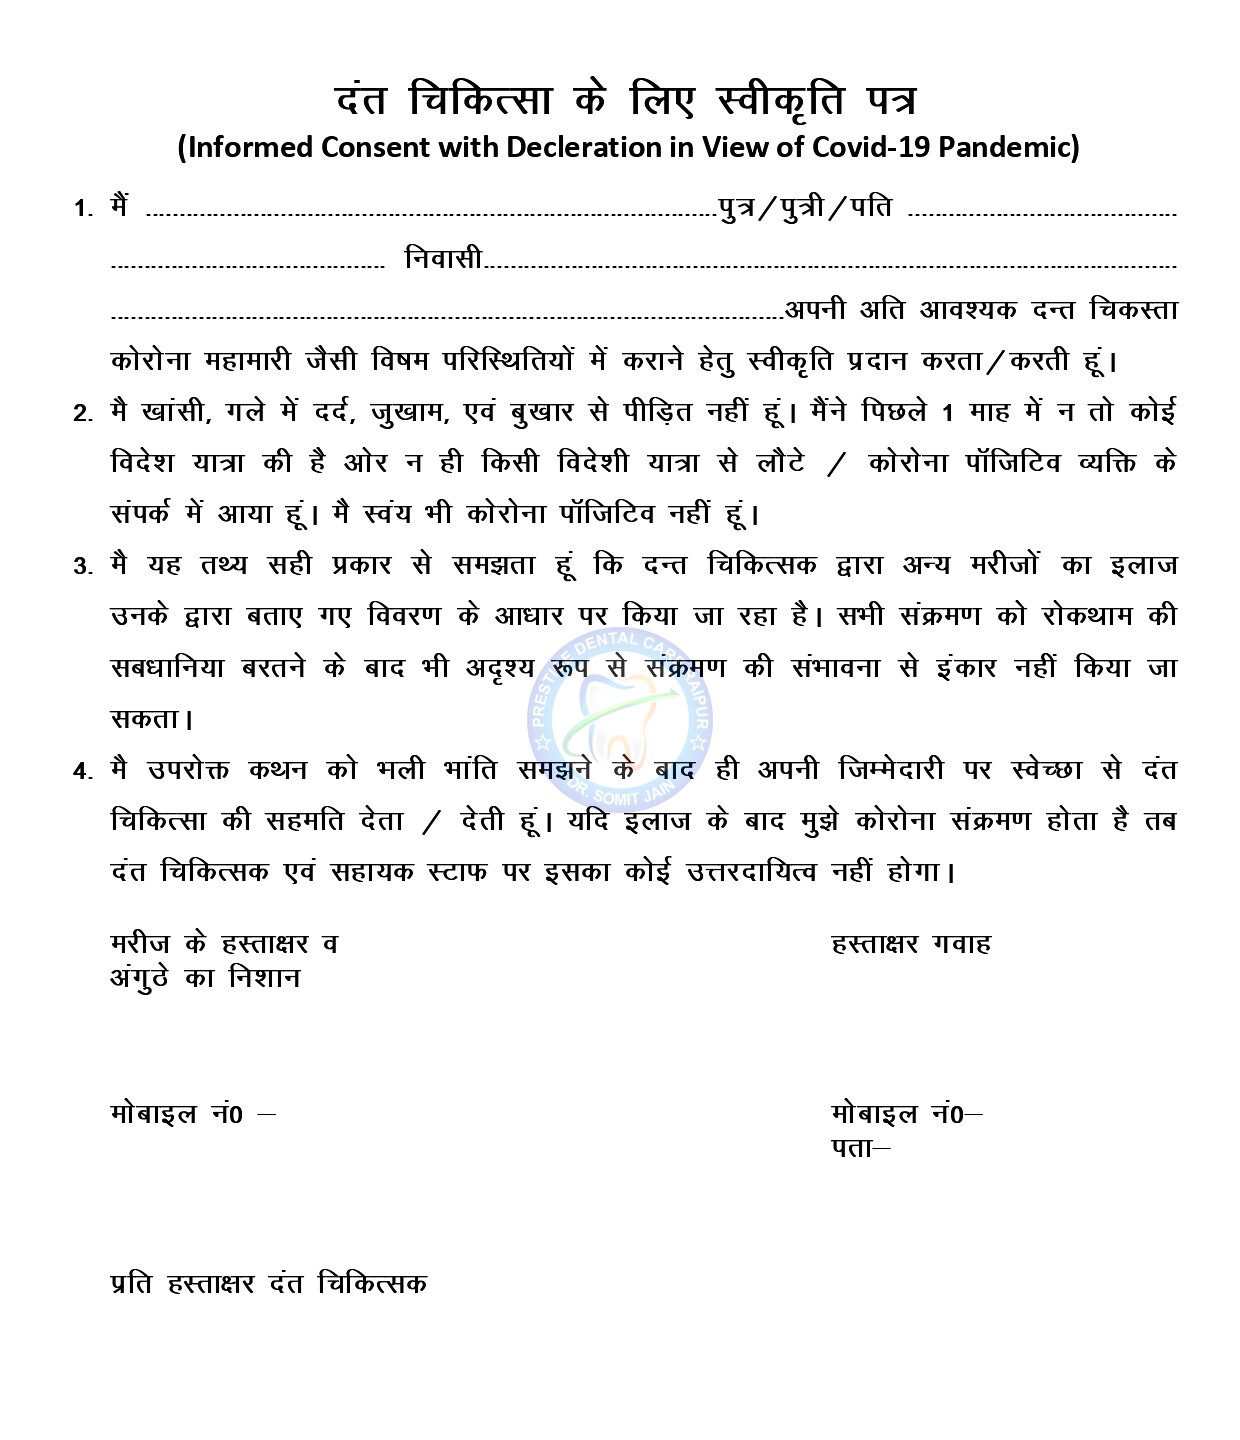 COVID consent form for dental treatment in Hindi